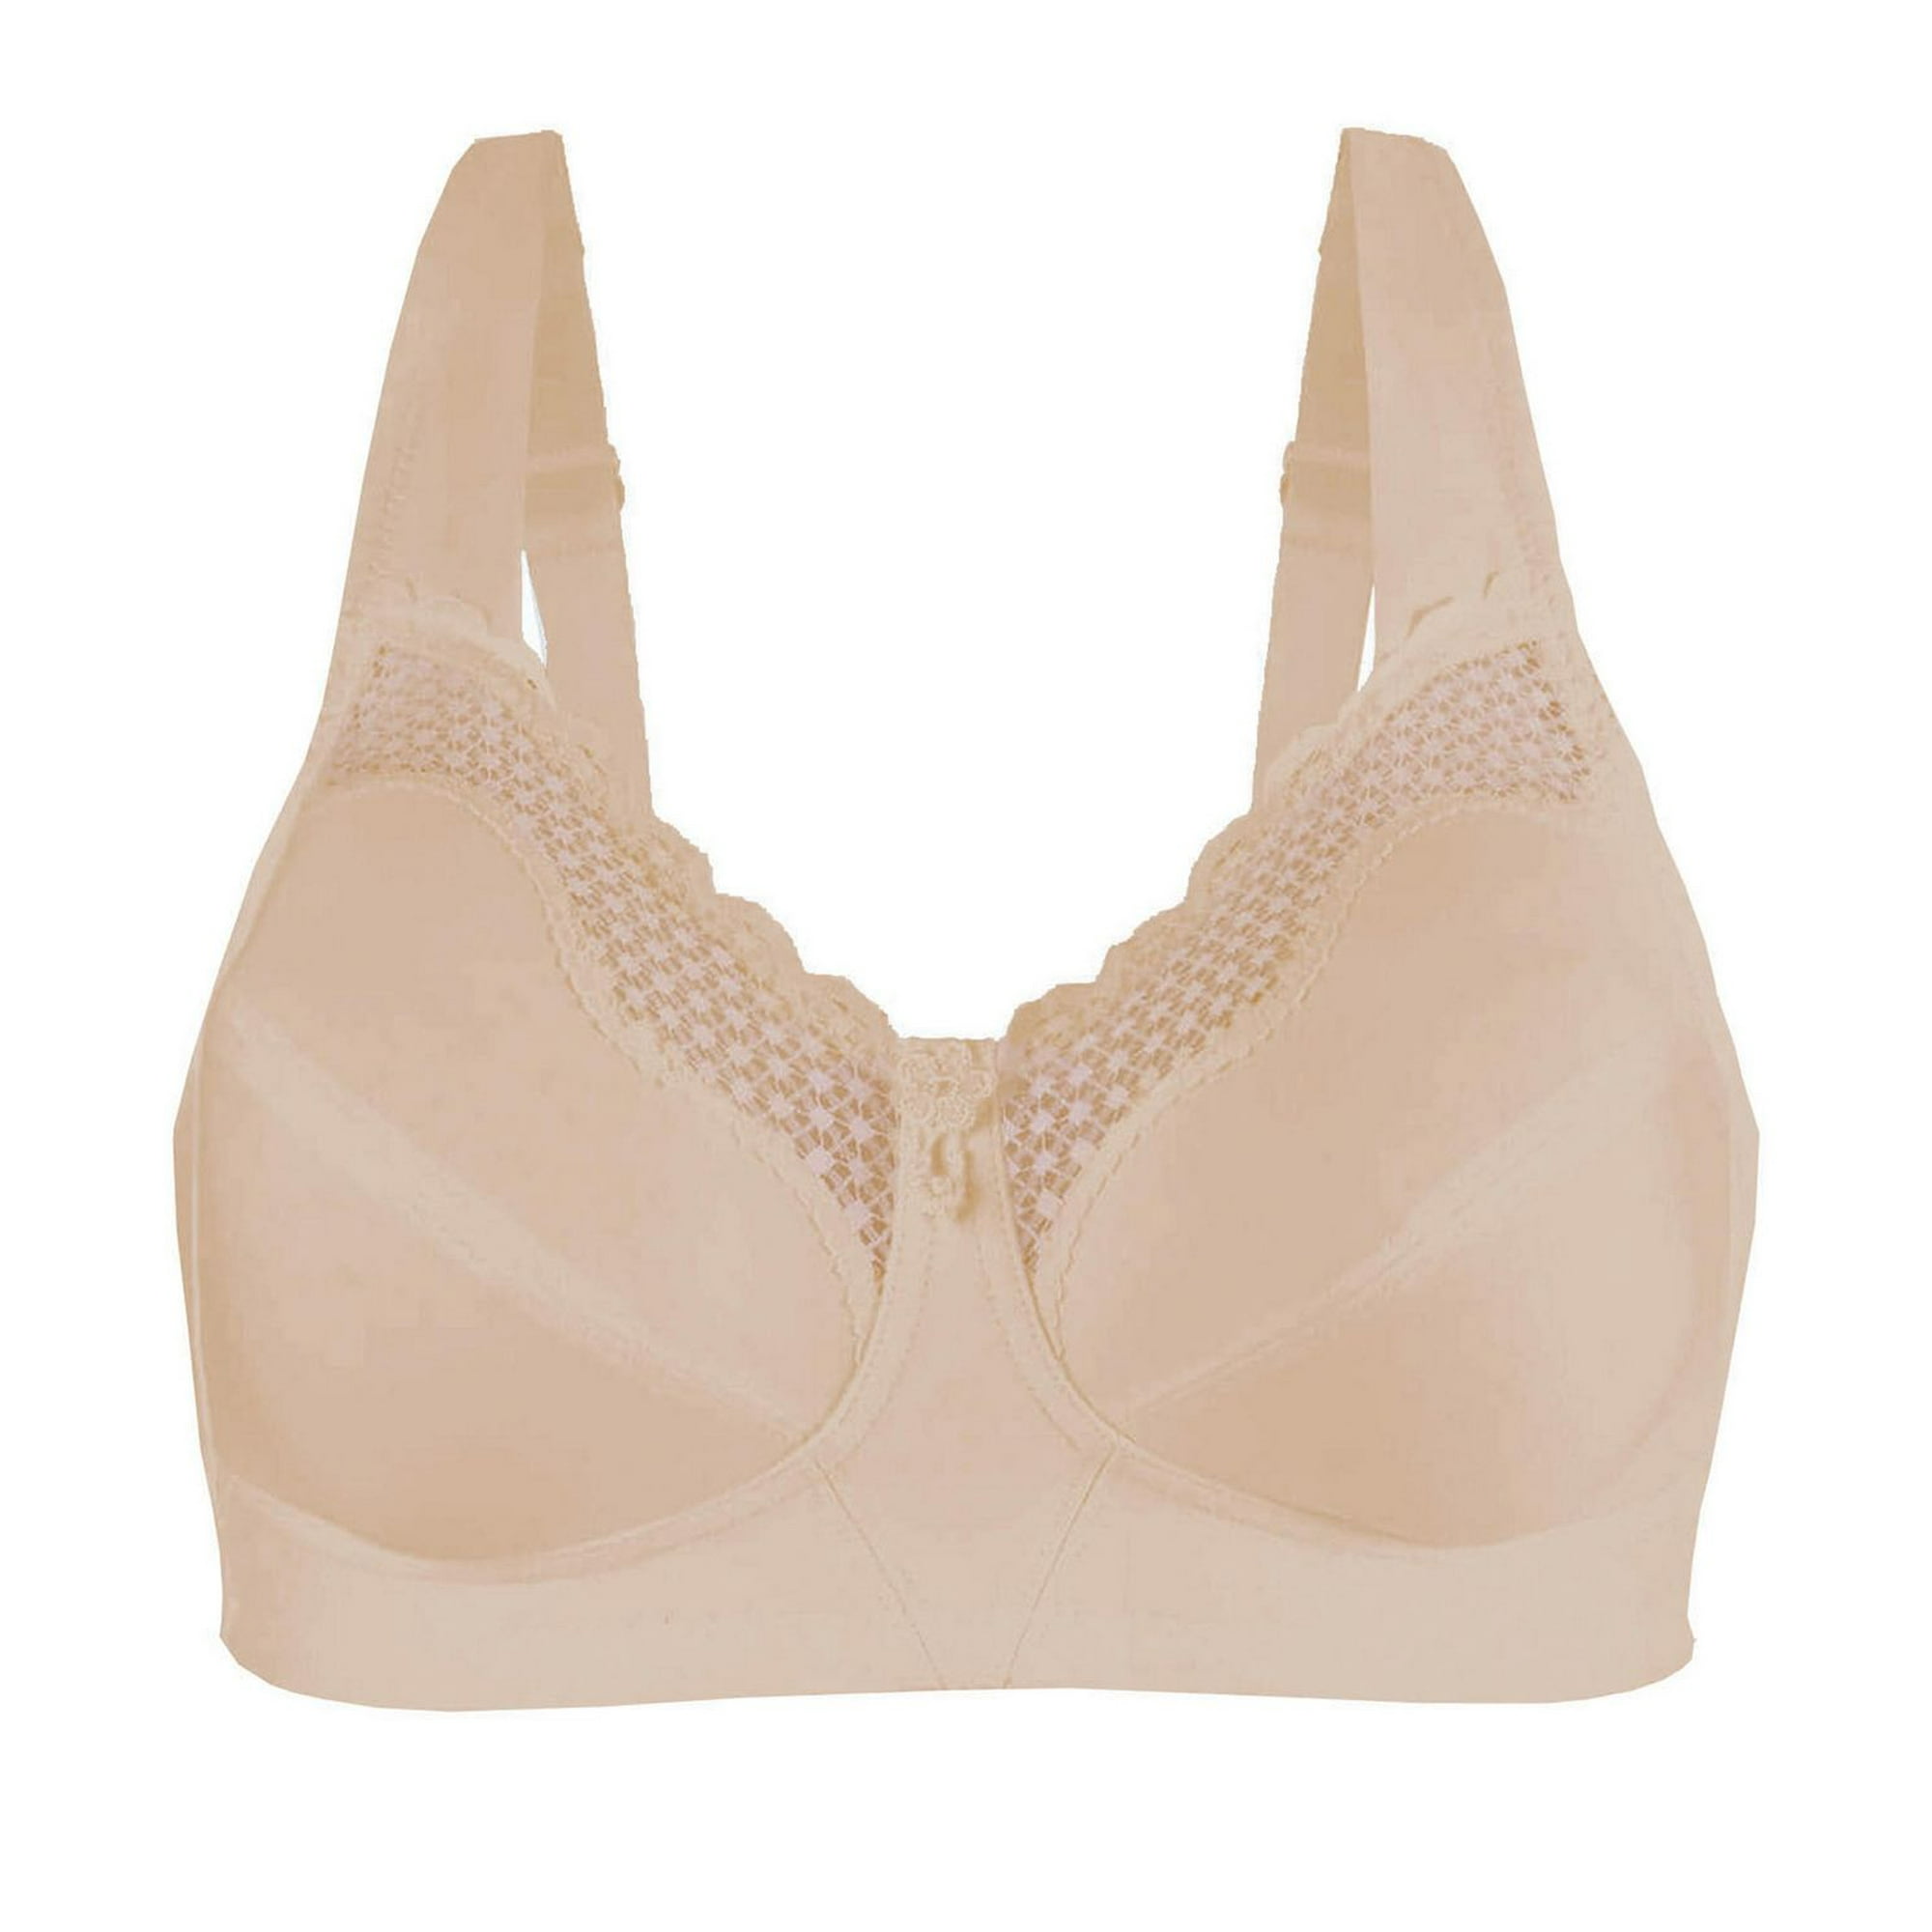 Artisan Lace Wired Push Up Bra in Silk White